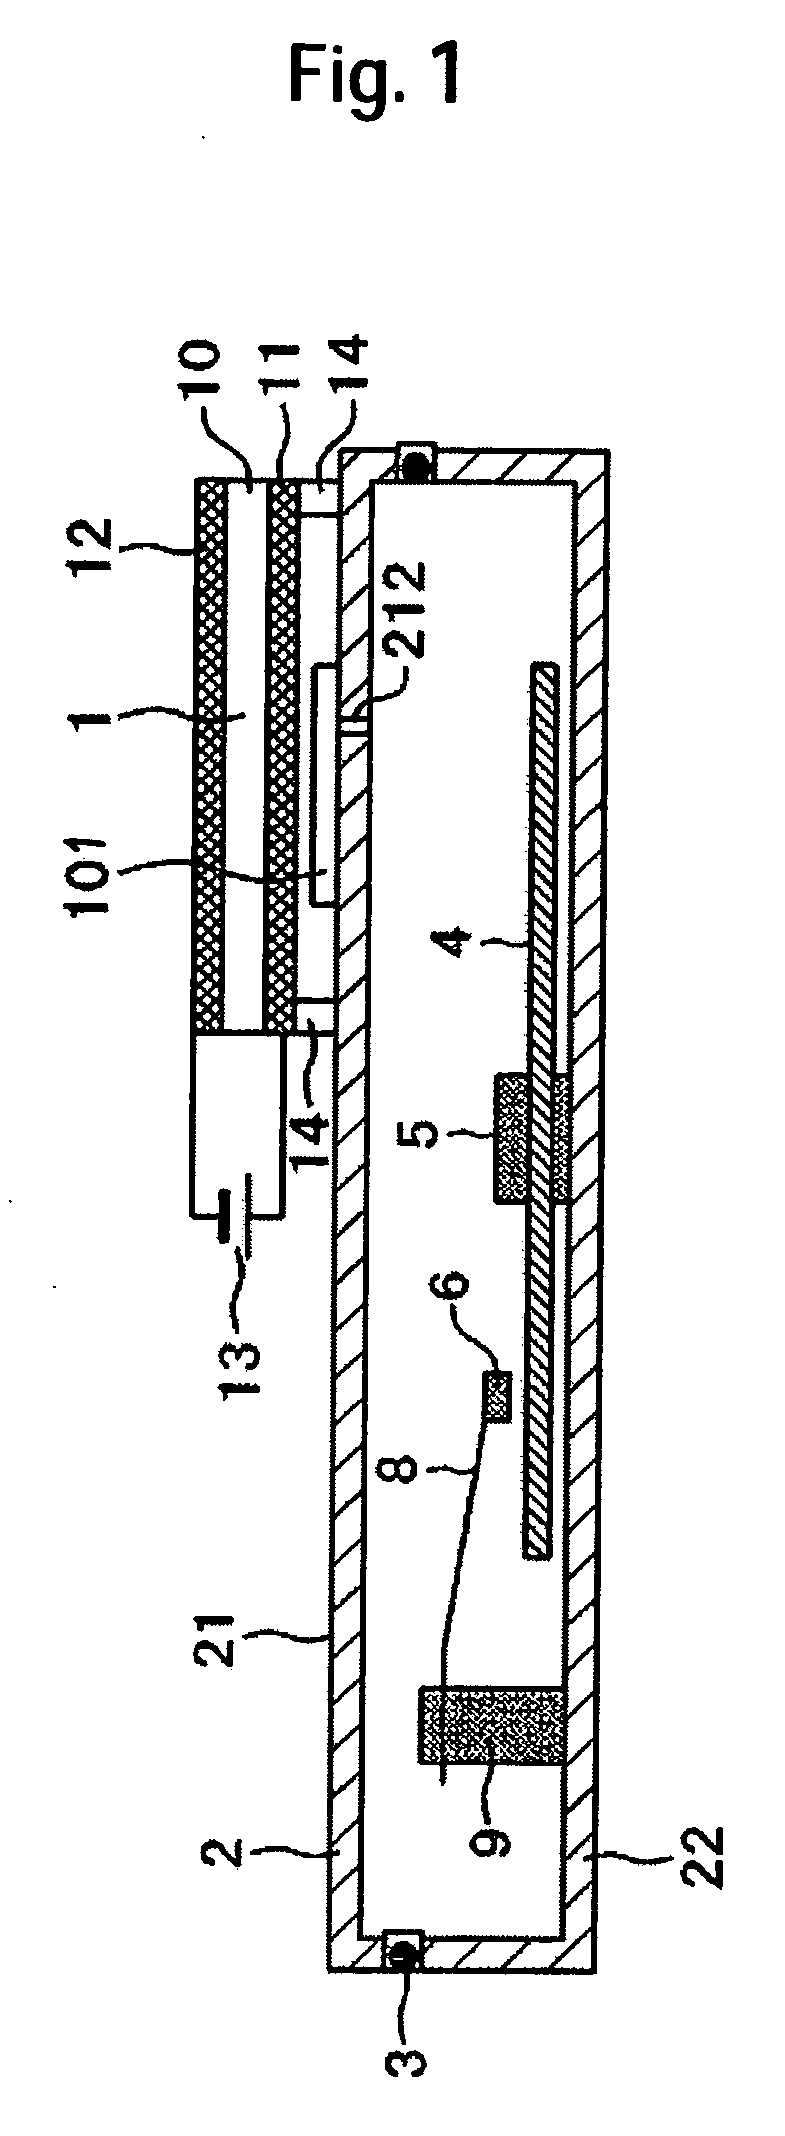 Hard disk drive with humidity control using membrane electrode assembly